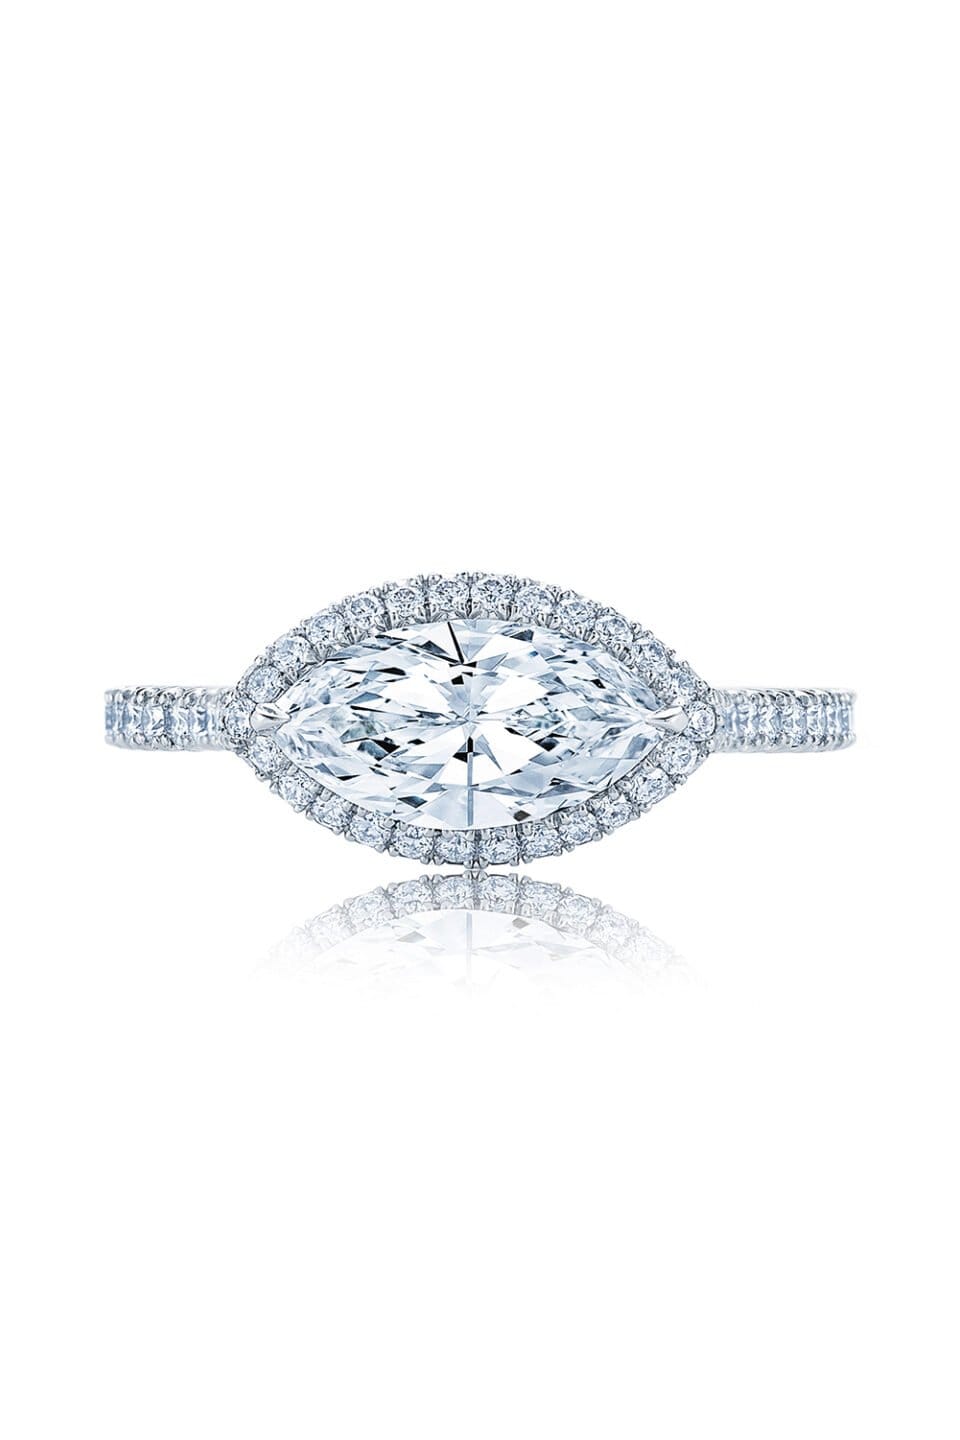 KWIAT-Marquise Diamond with Pave Engagement Ring-PLAT